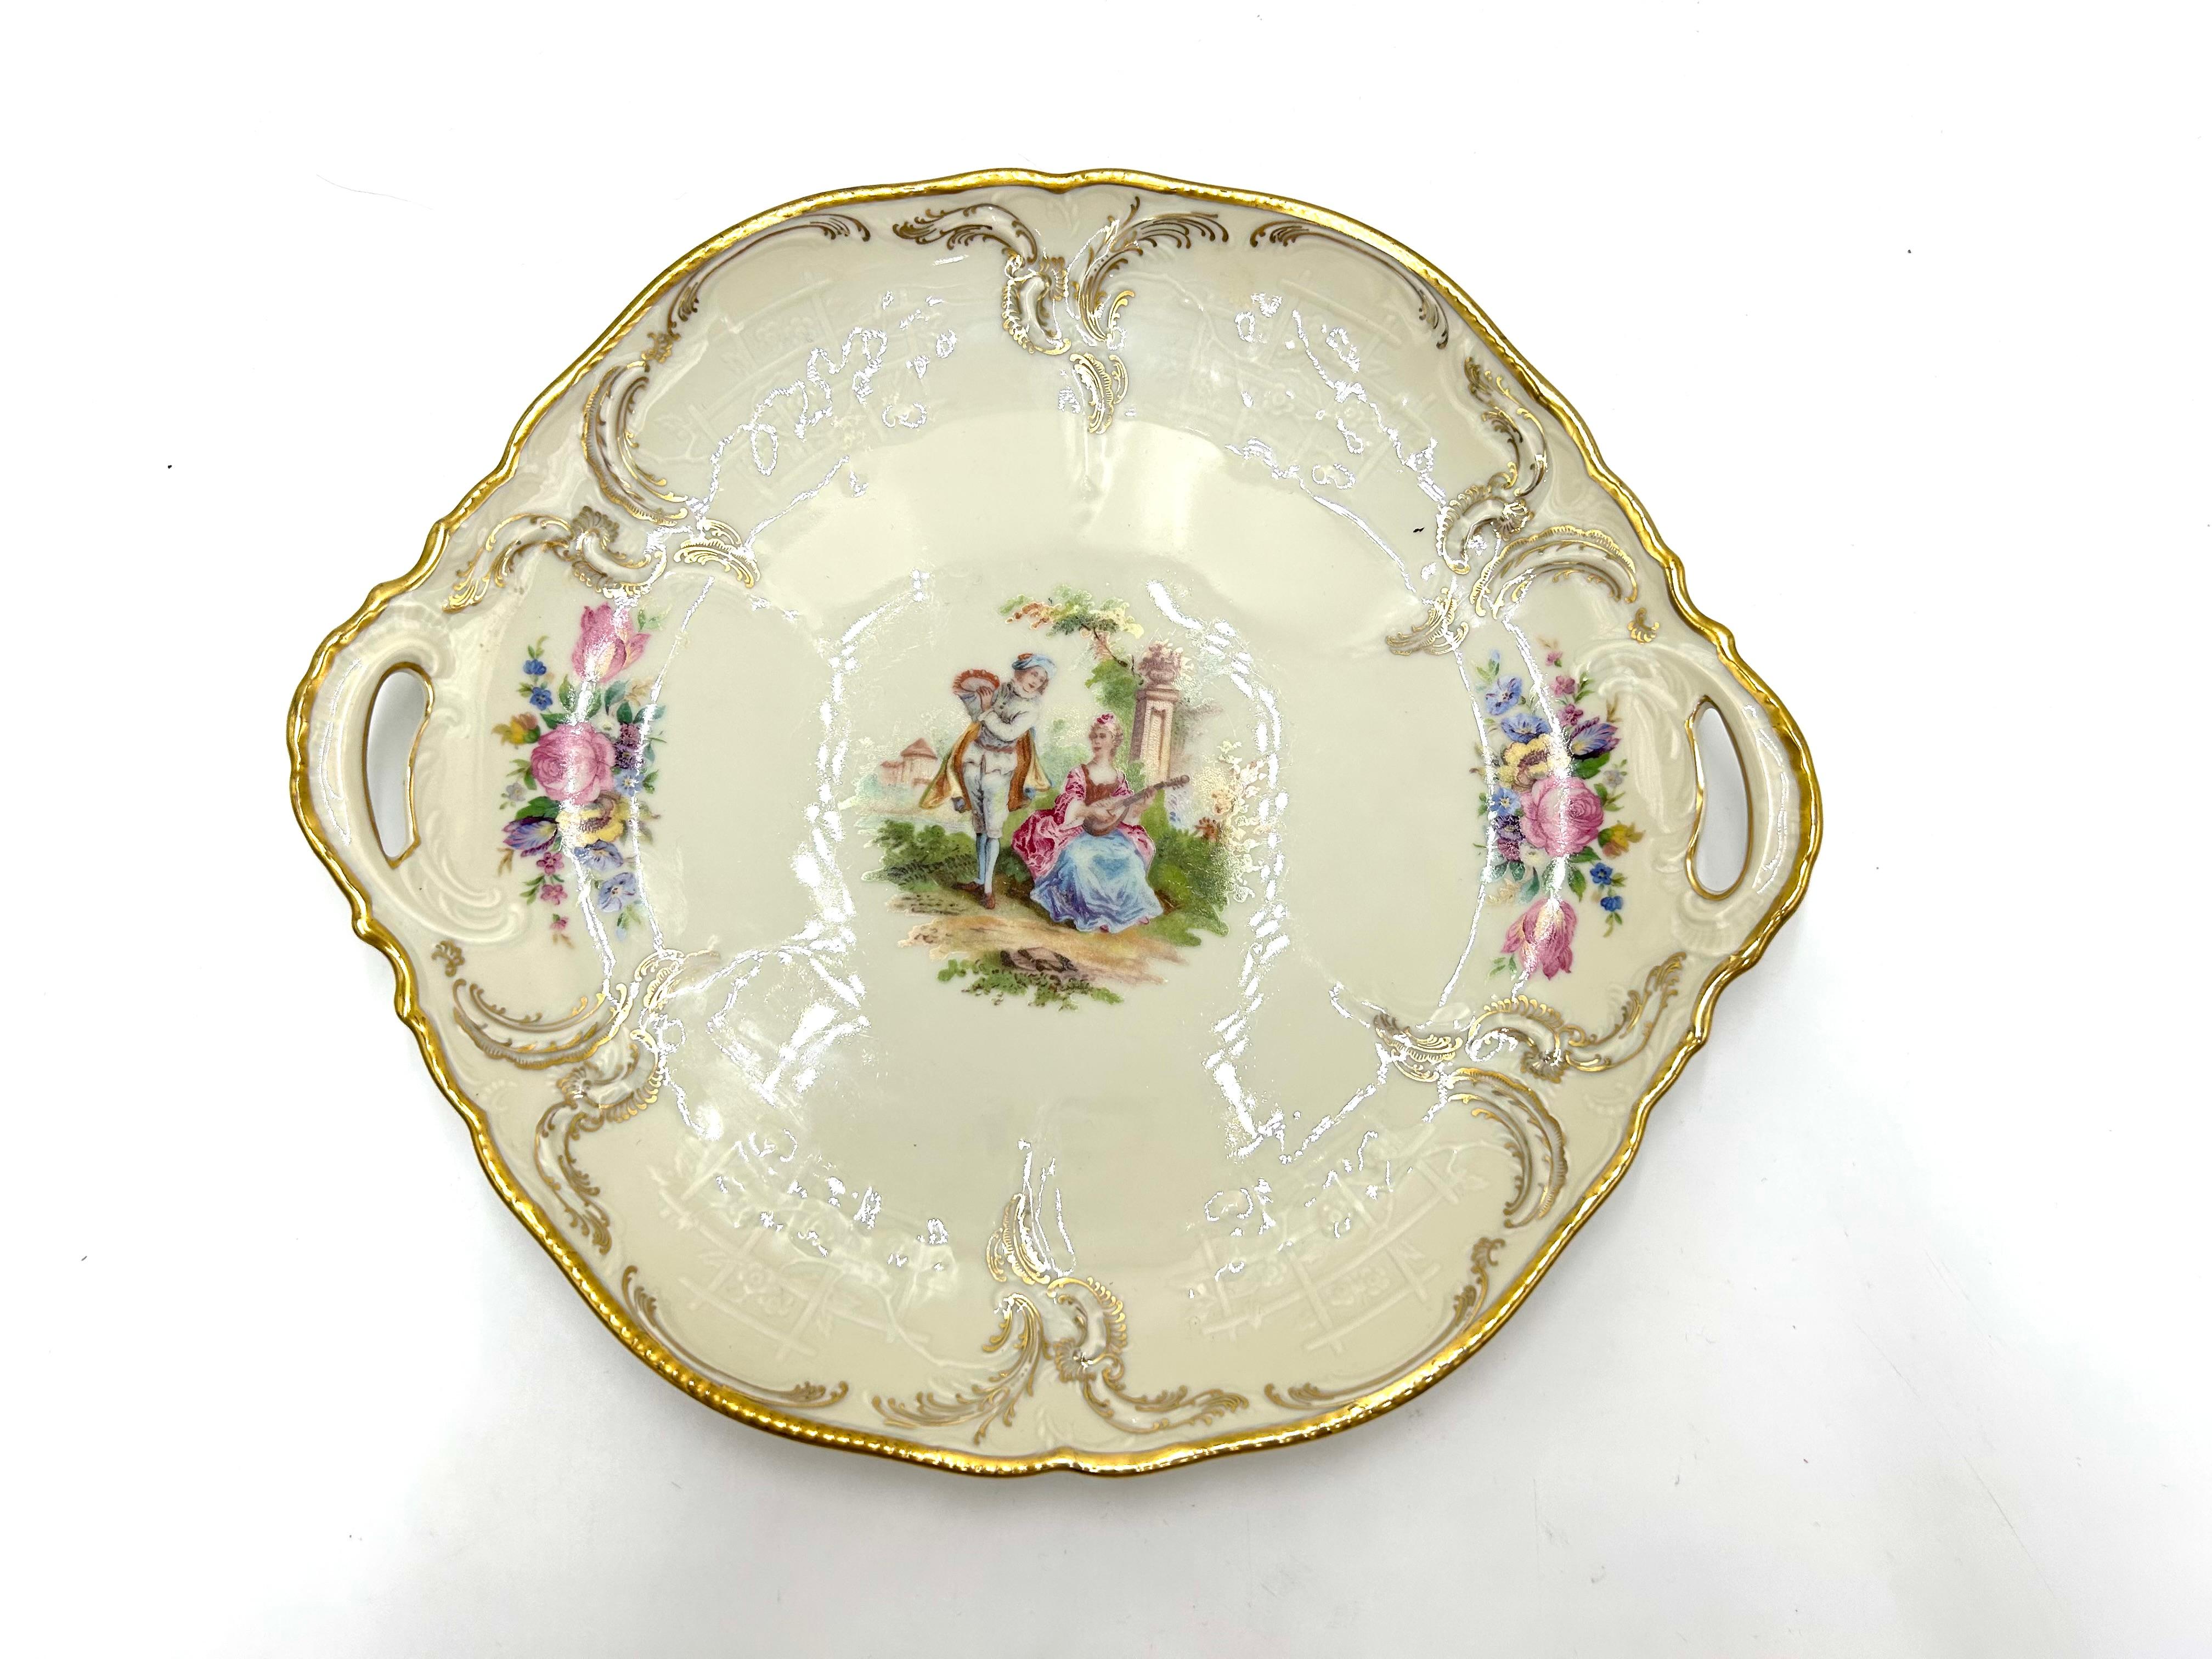 A large porcelain cake dish, a product of the Sanssouci series by the valued German manufacturer Rosenthal.
Porcelain in ecru color, decorated with gilding, motif of floral bouquets and a genre scene.
Signed with the mark of the manufacturer from